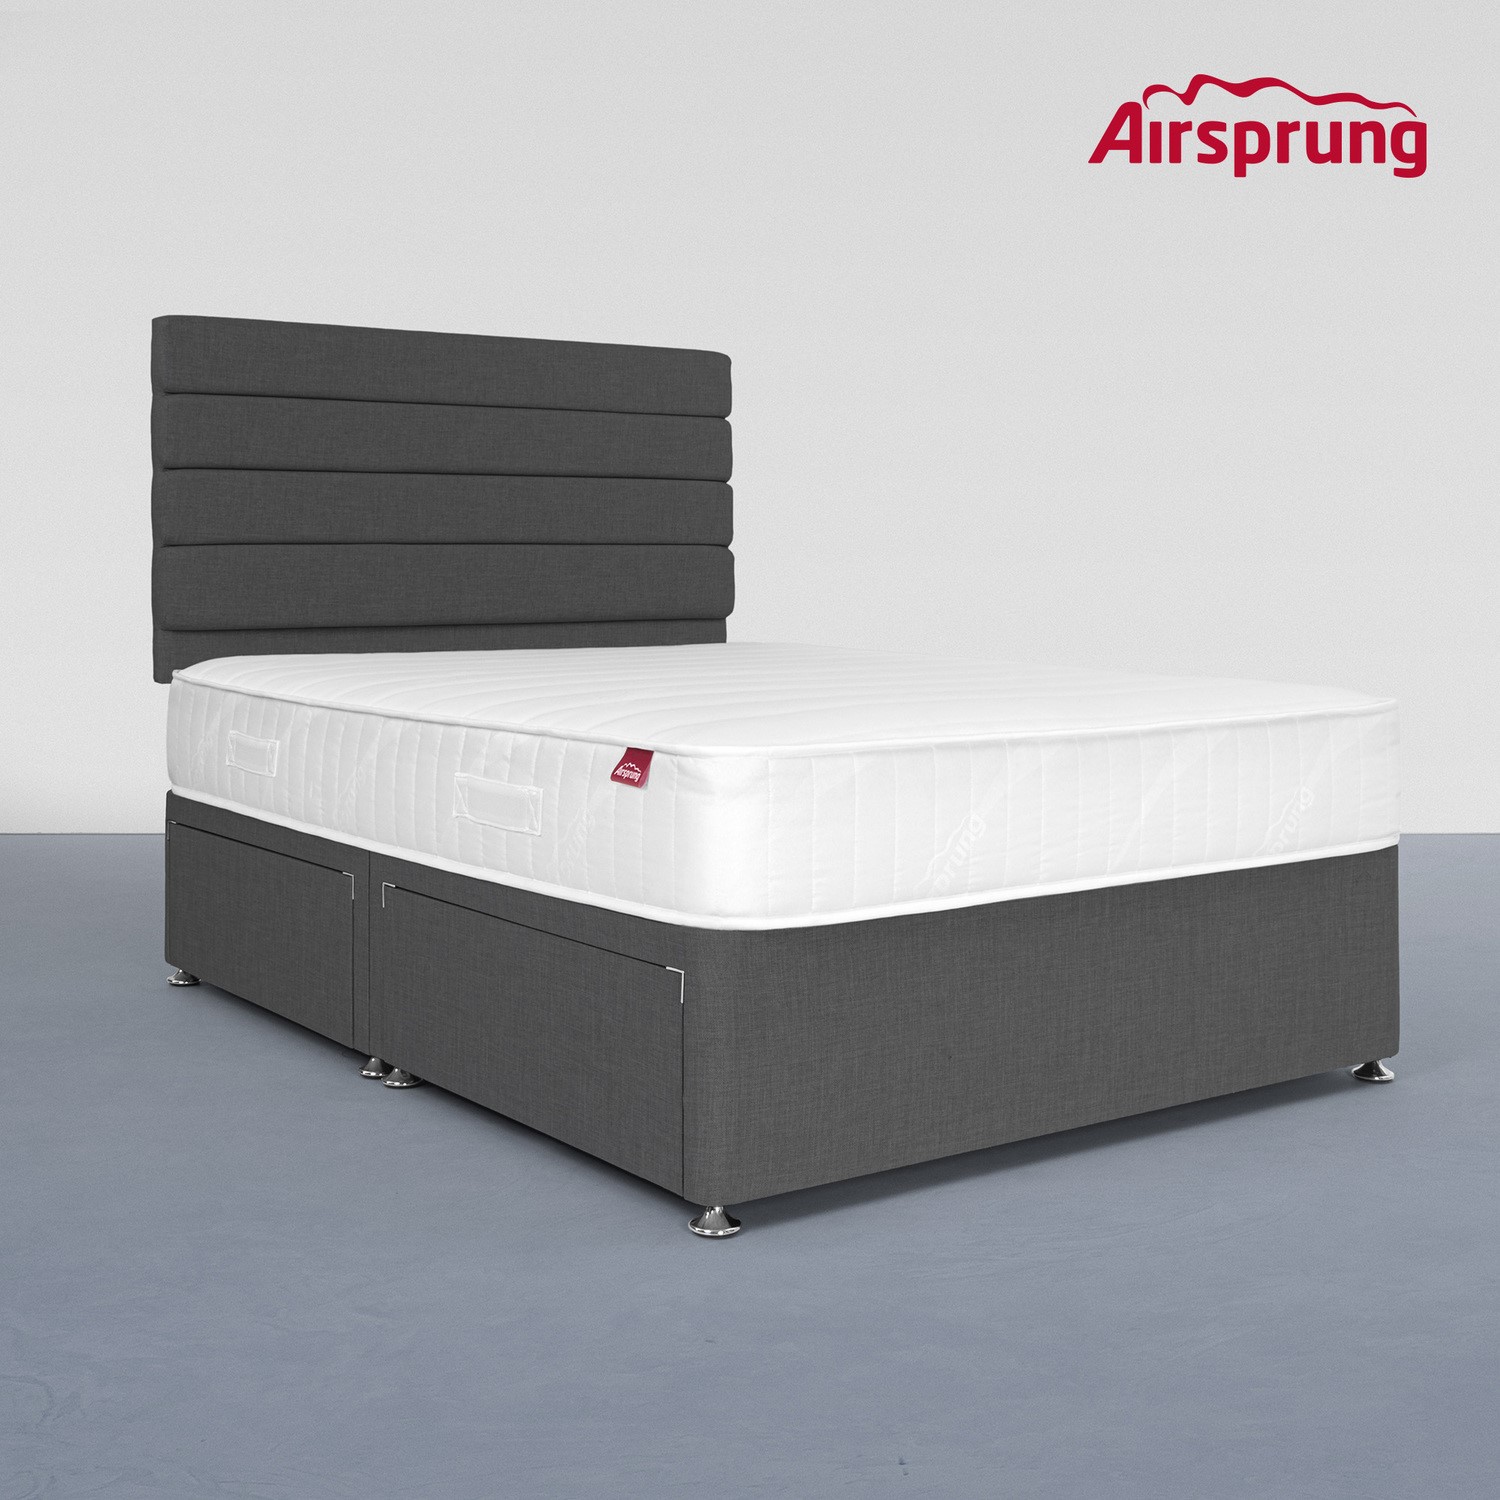 Photo of Airsprung double 4 drawer divan bed with comfort mattress - charcoal